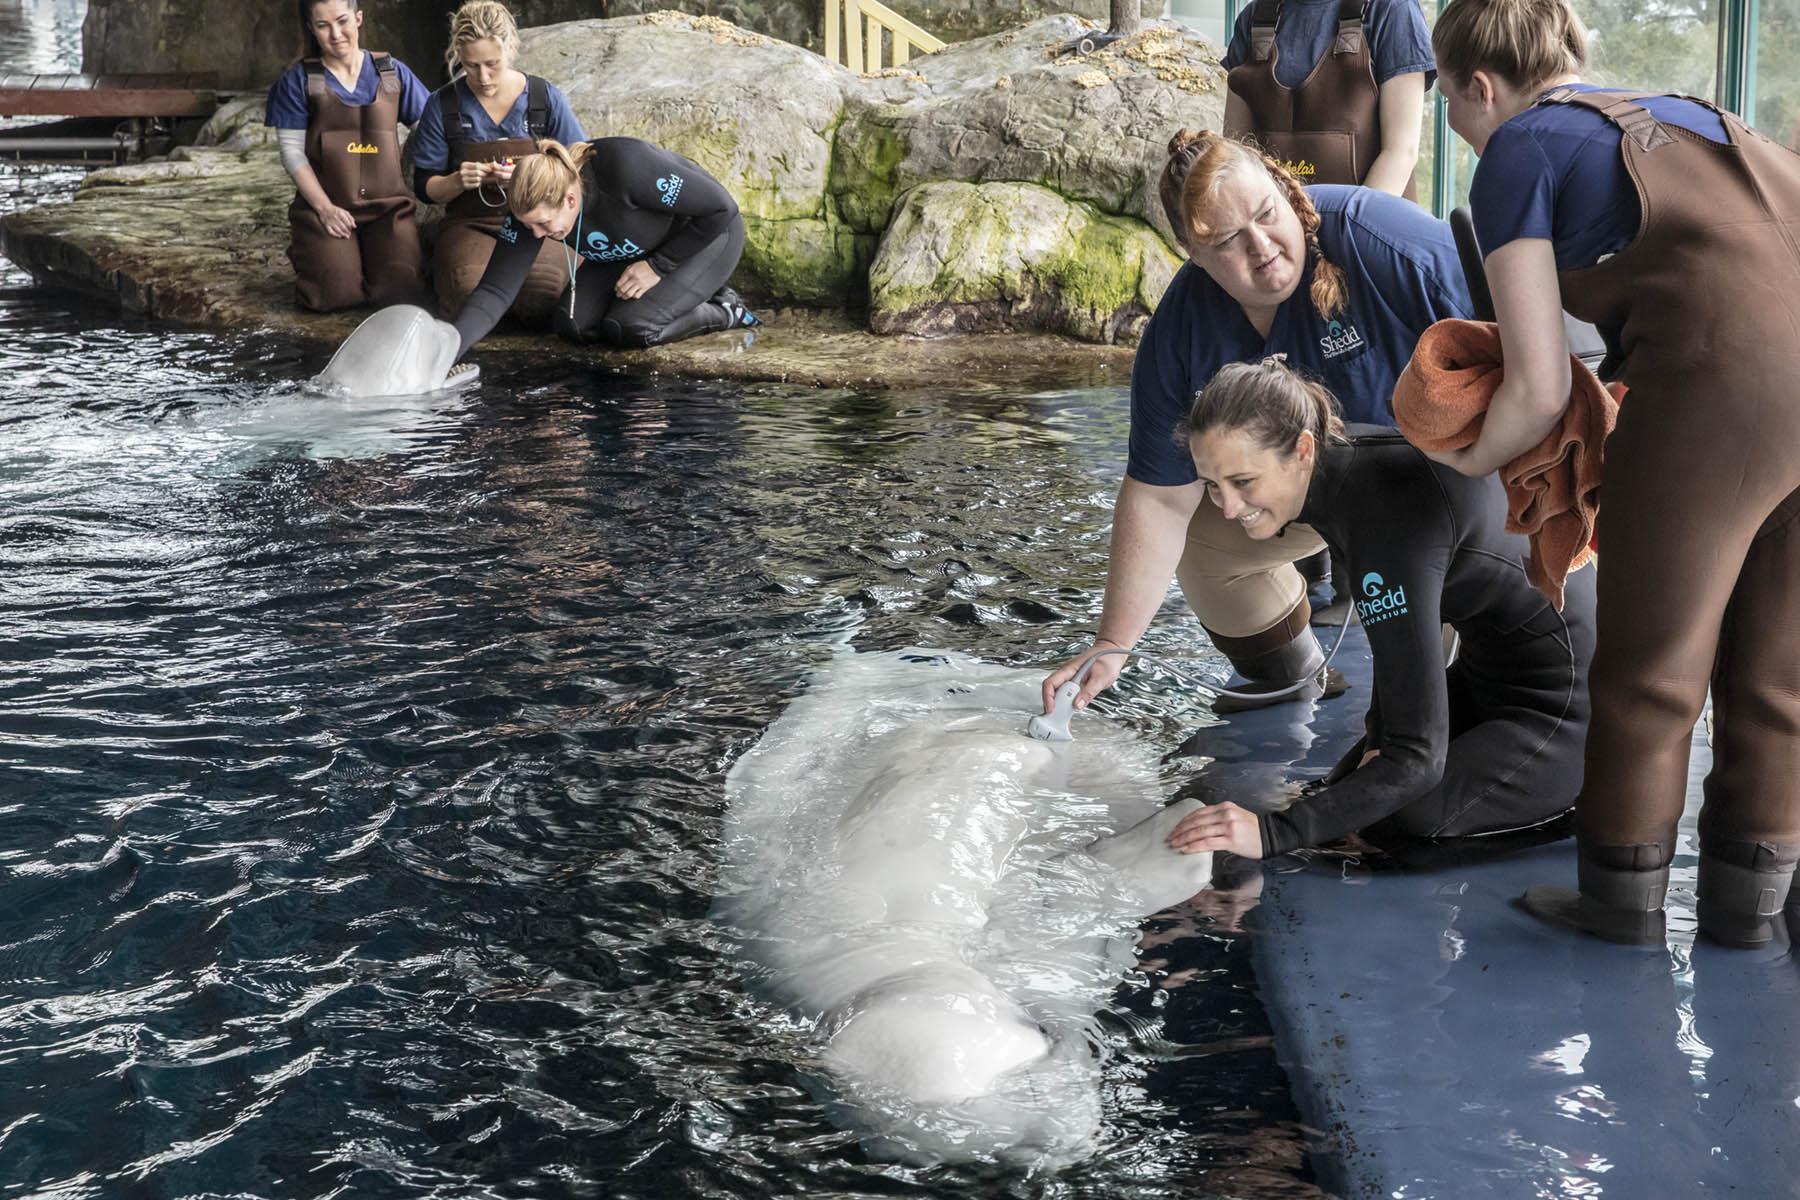 Earlier this year, Shedd Aquarium’s veterinary team performed a routine ultrasound on Mauyak, a 38-year-old beluga whale, to check in on her developing calf. (Brenna Hernandez / Shedd Aquarium)